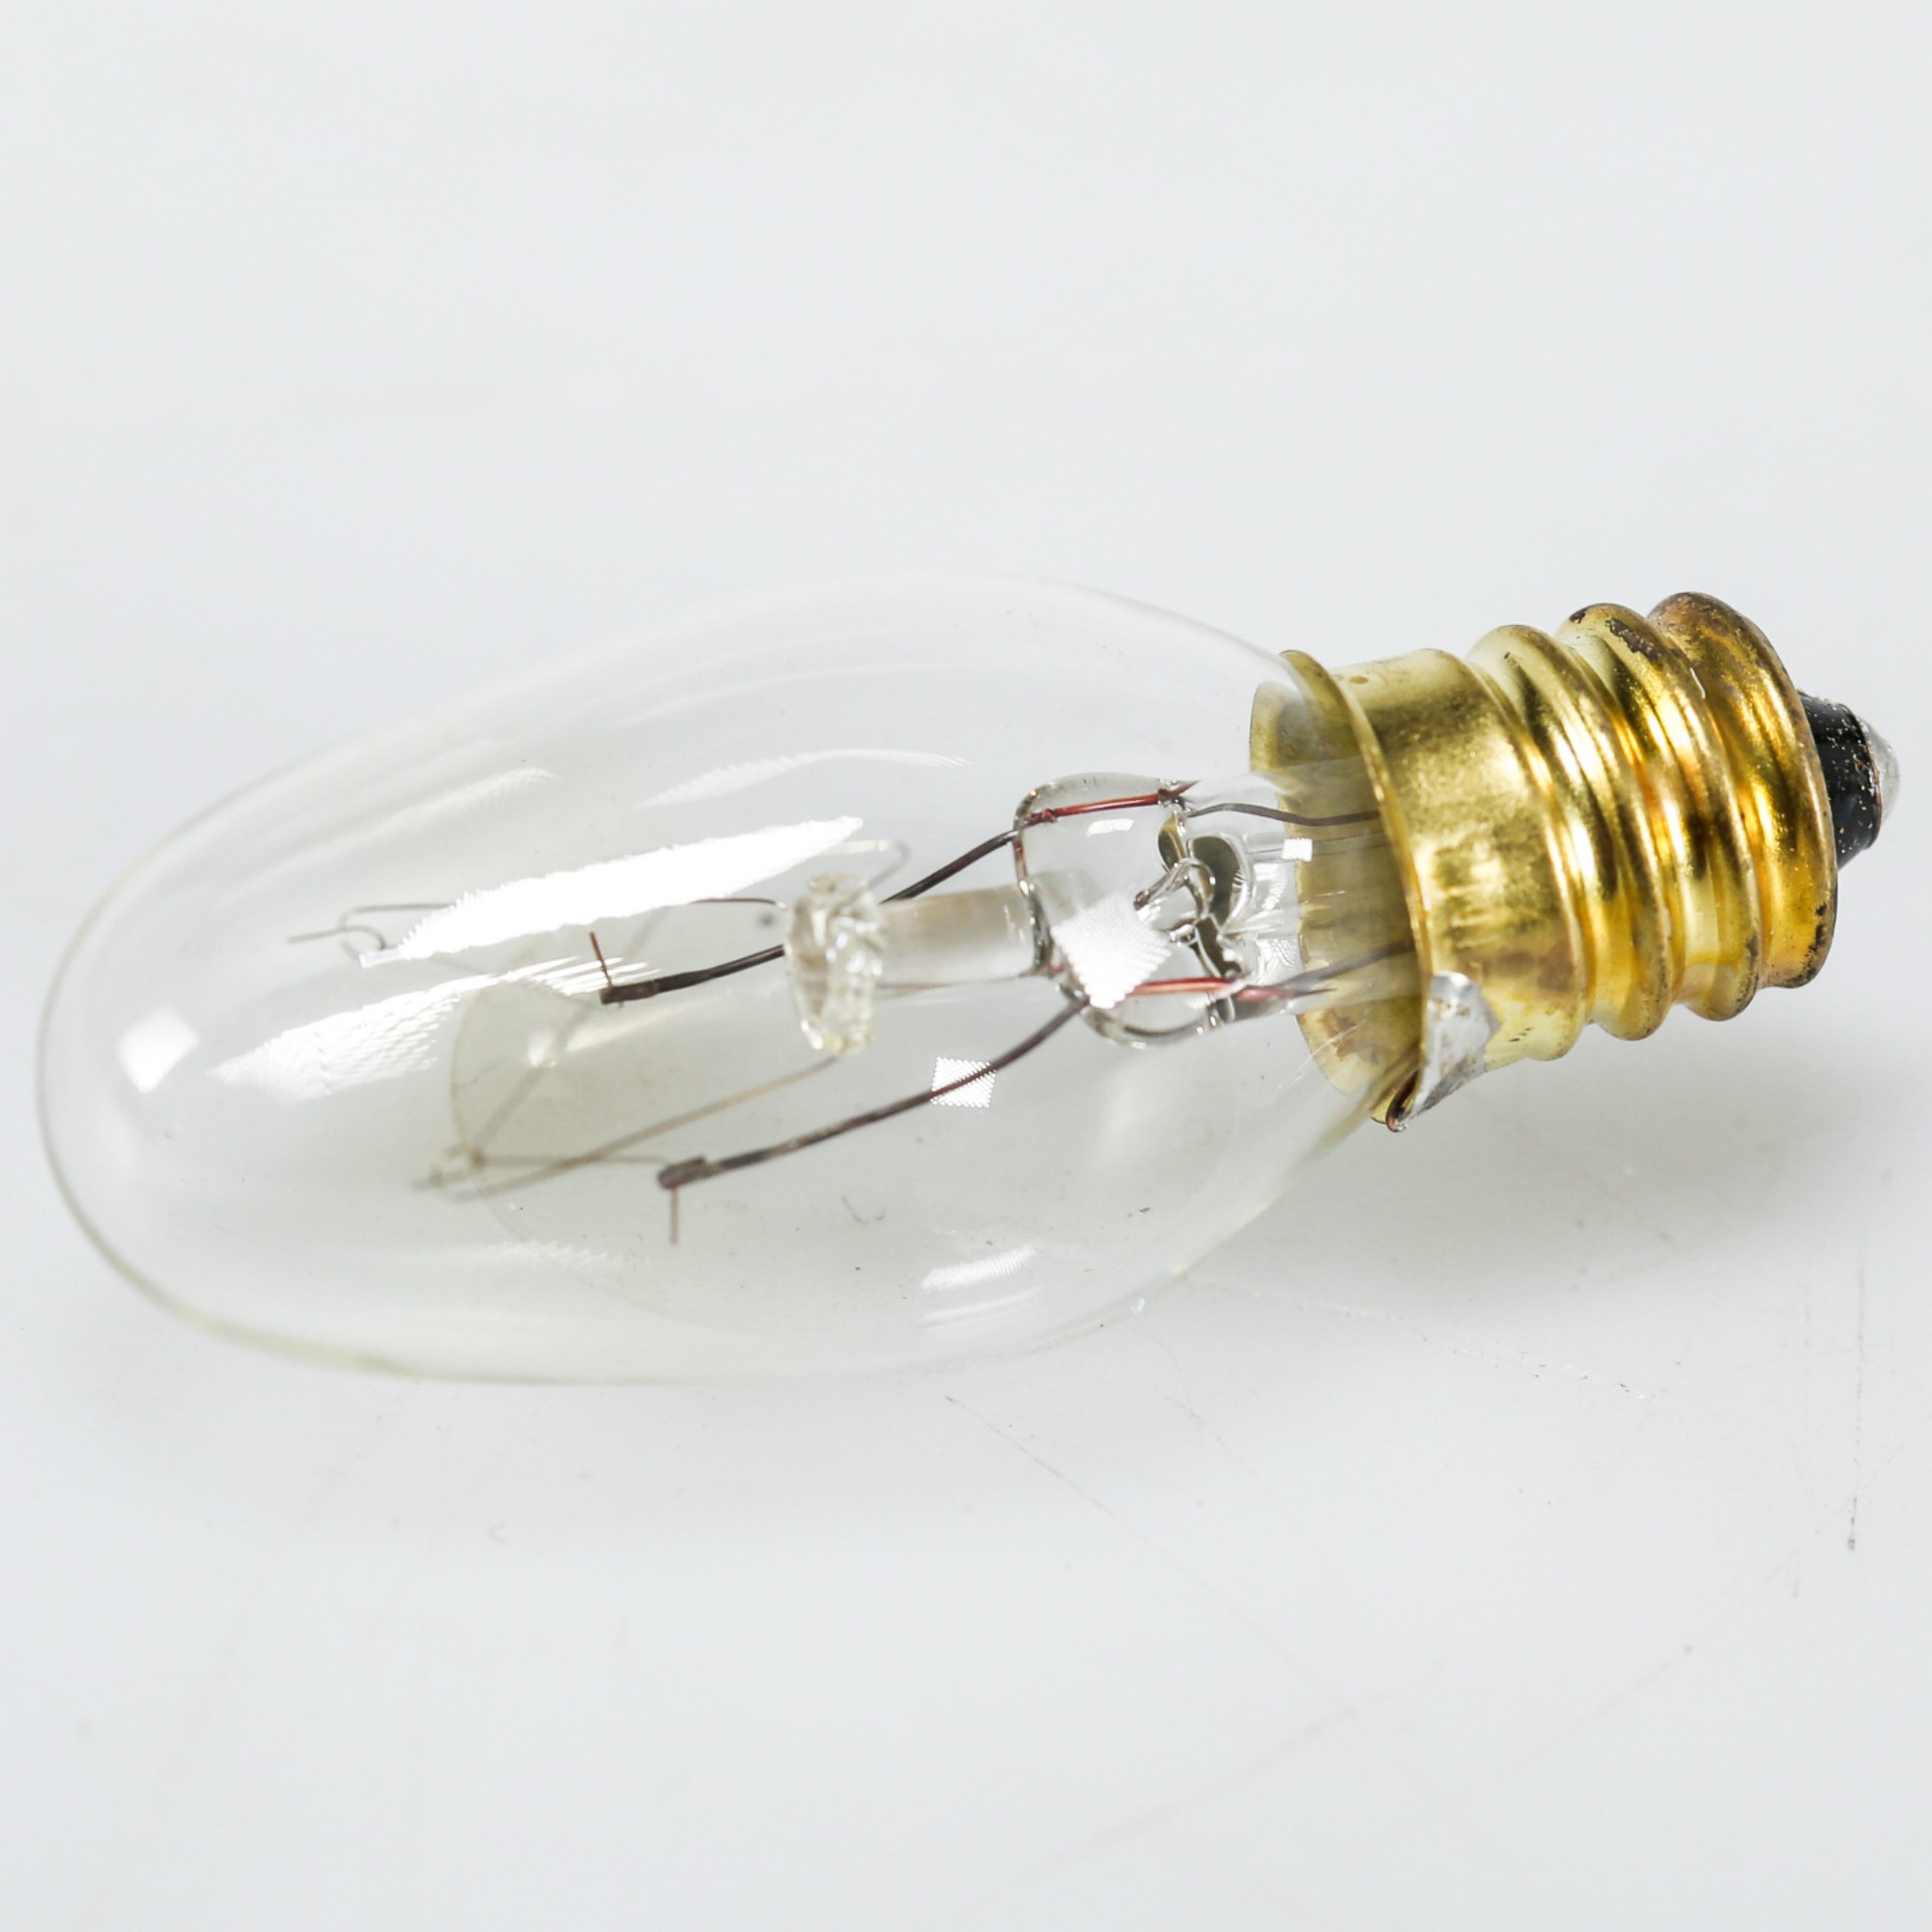 What Kind Of Light Bulb Is Used For Refrigerator